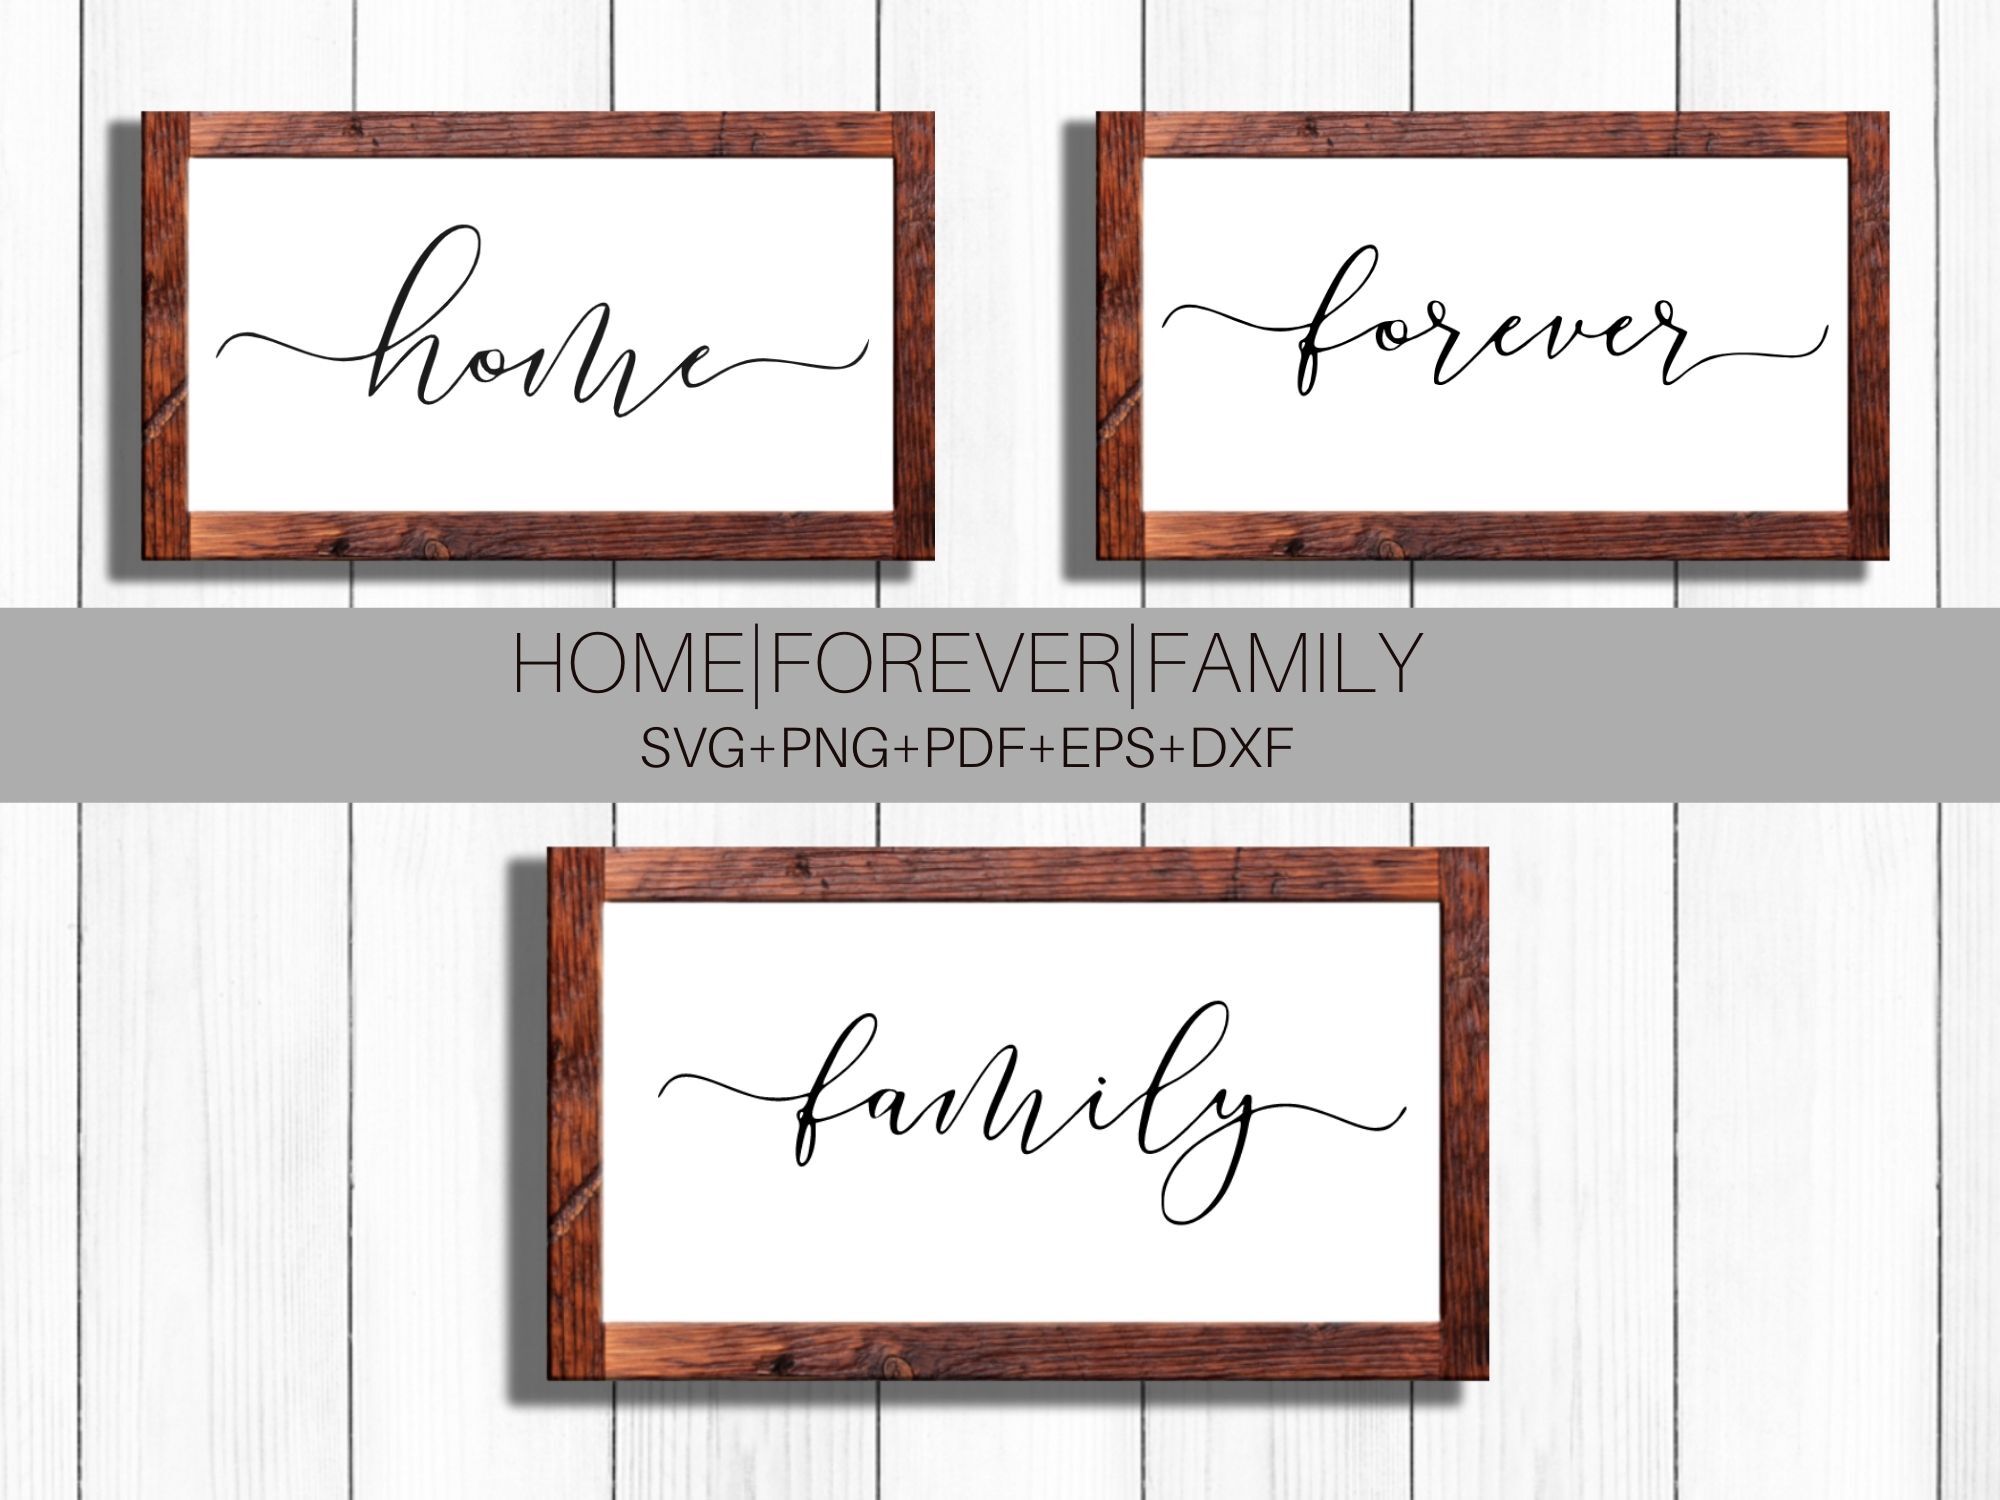 Home, Family, Forever Script SVG Cut Files By MockupVenue ...